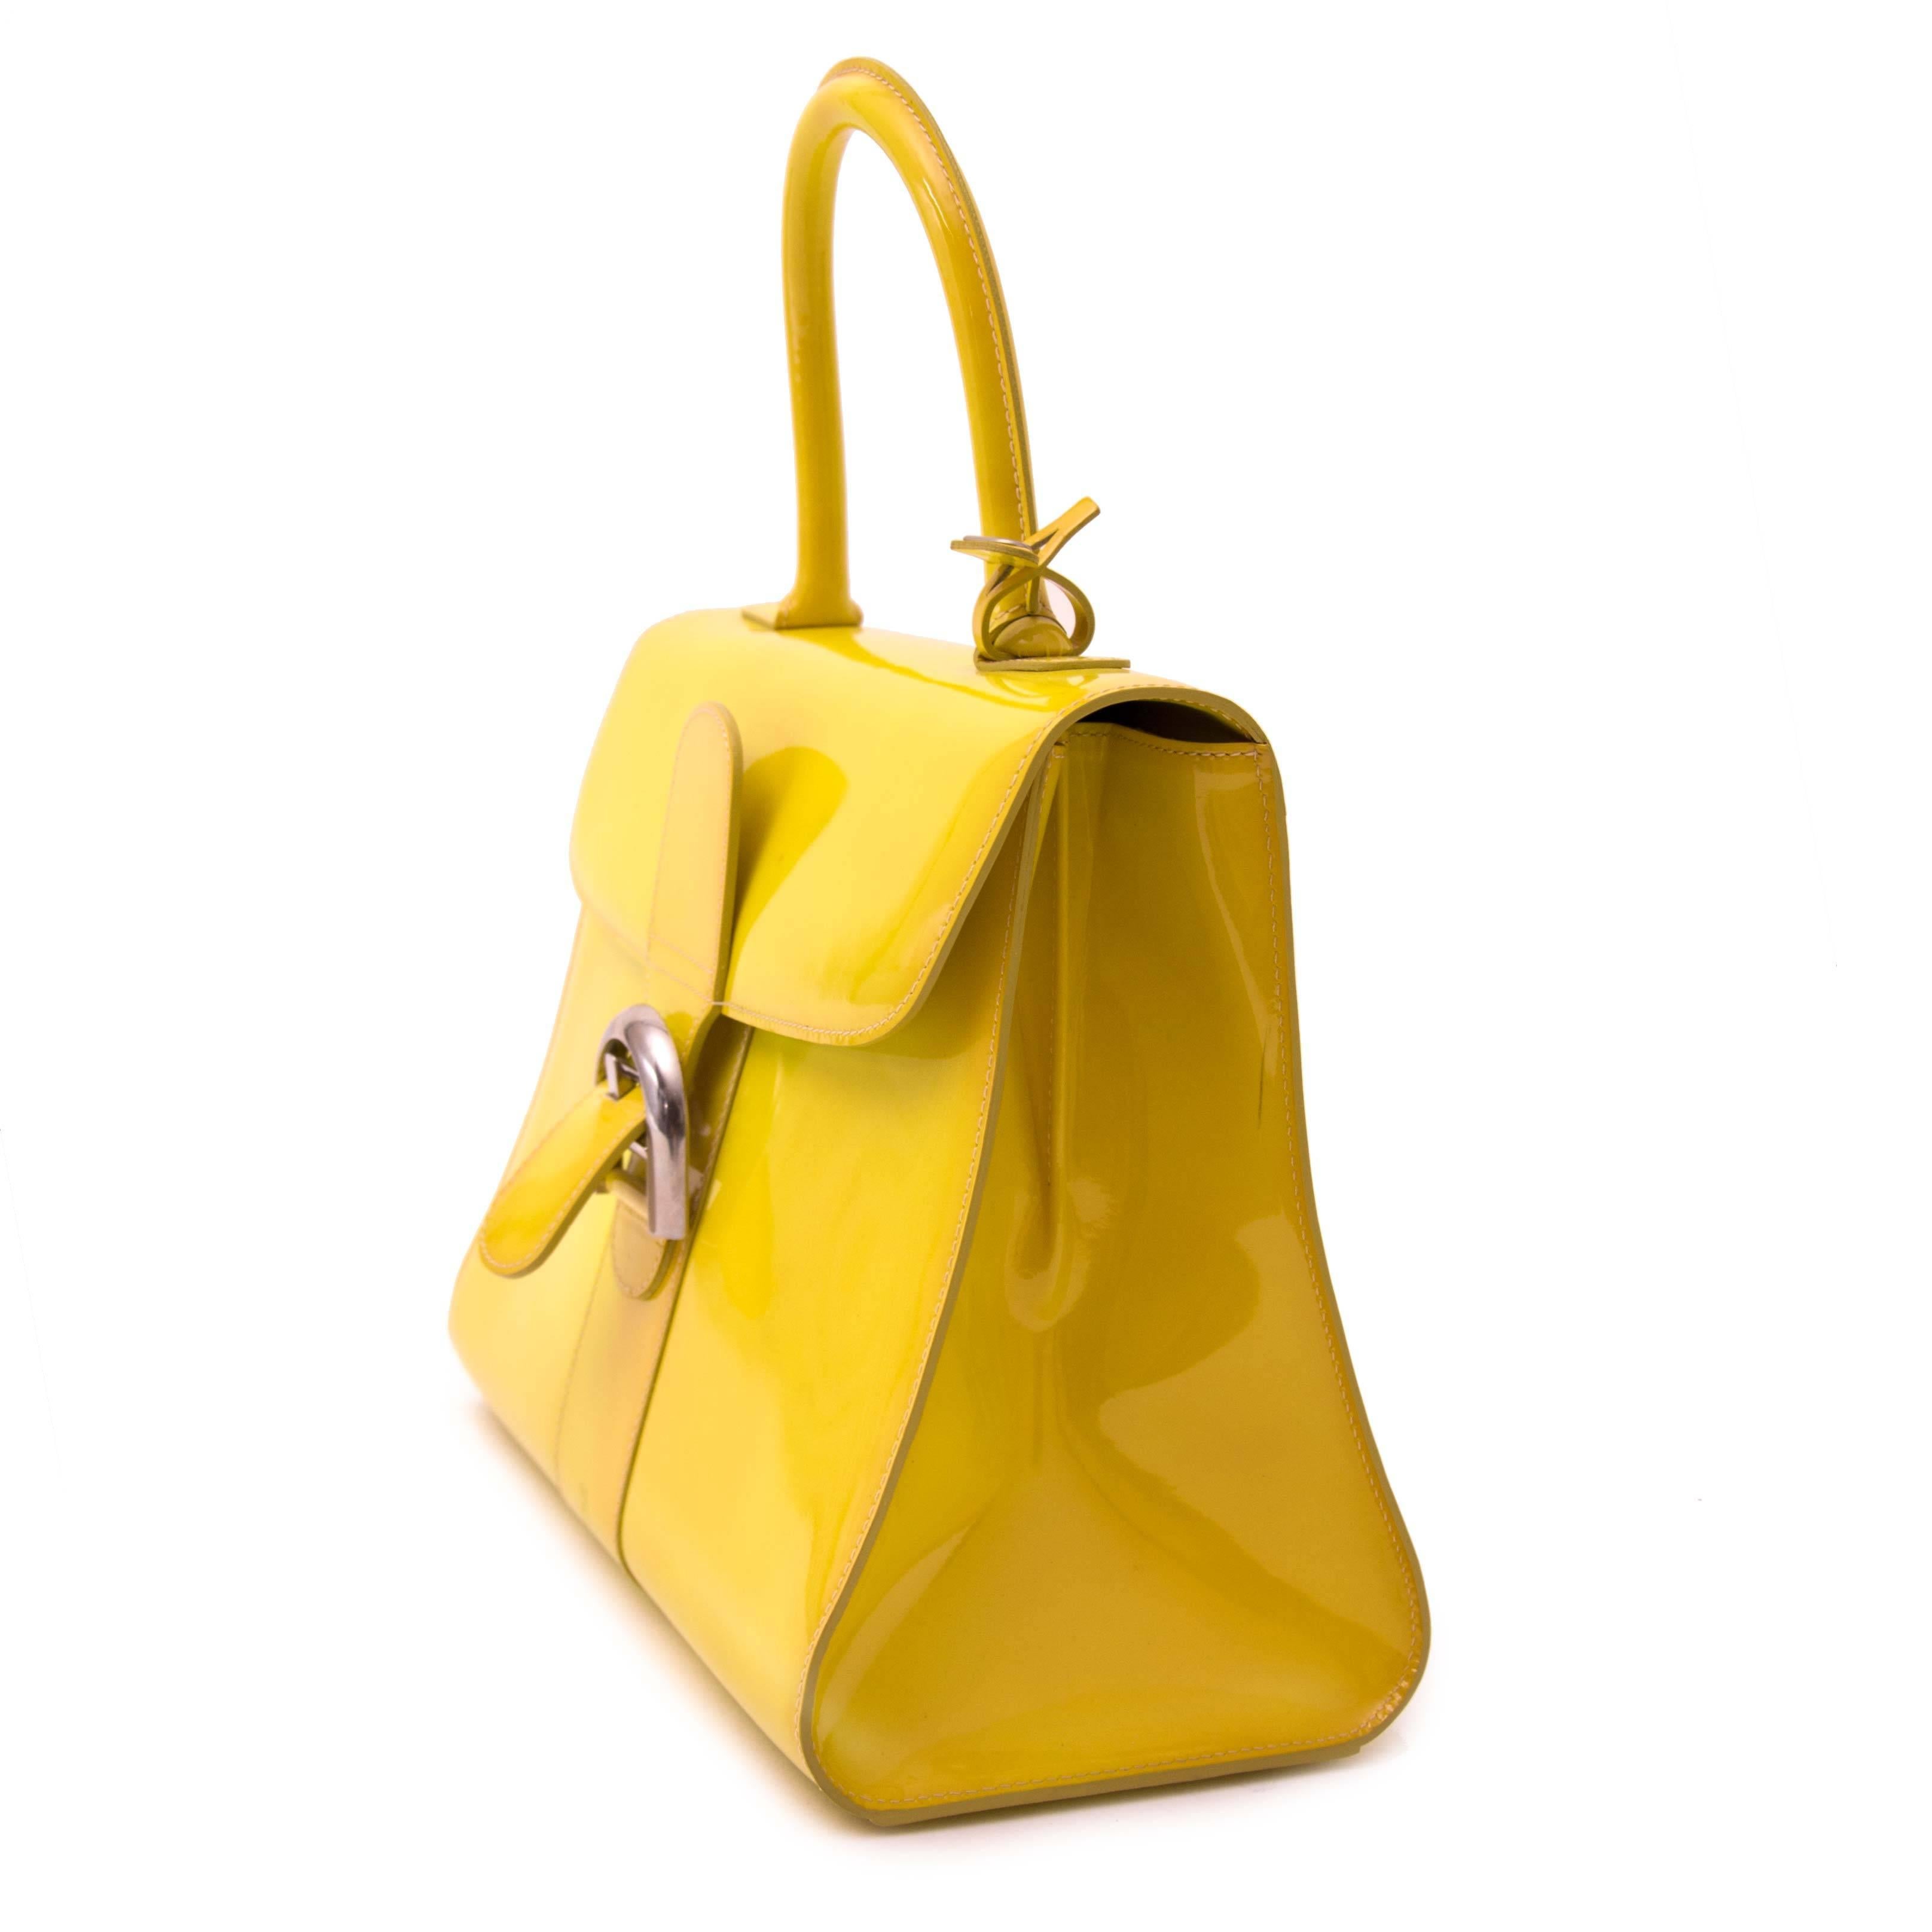 Good Preloved Condition

Rare Delvaux Limited Patent Fluo Yellow Brillant

Turn heads, make waves, carrying this bag will make you feel on top of the world! Very rare limited edition, only 15 pieces have been produced.

This fluo Brillant is one of